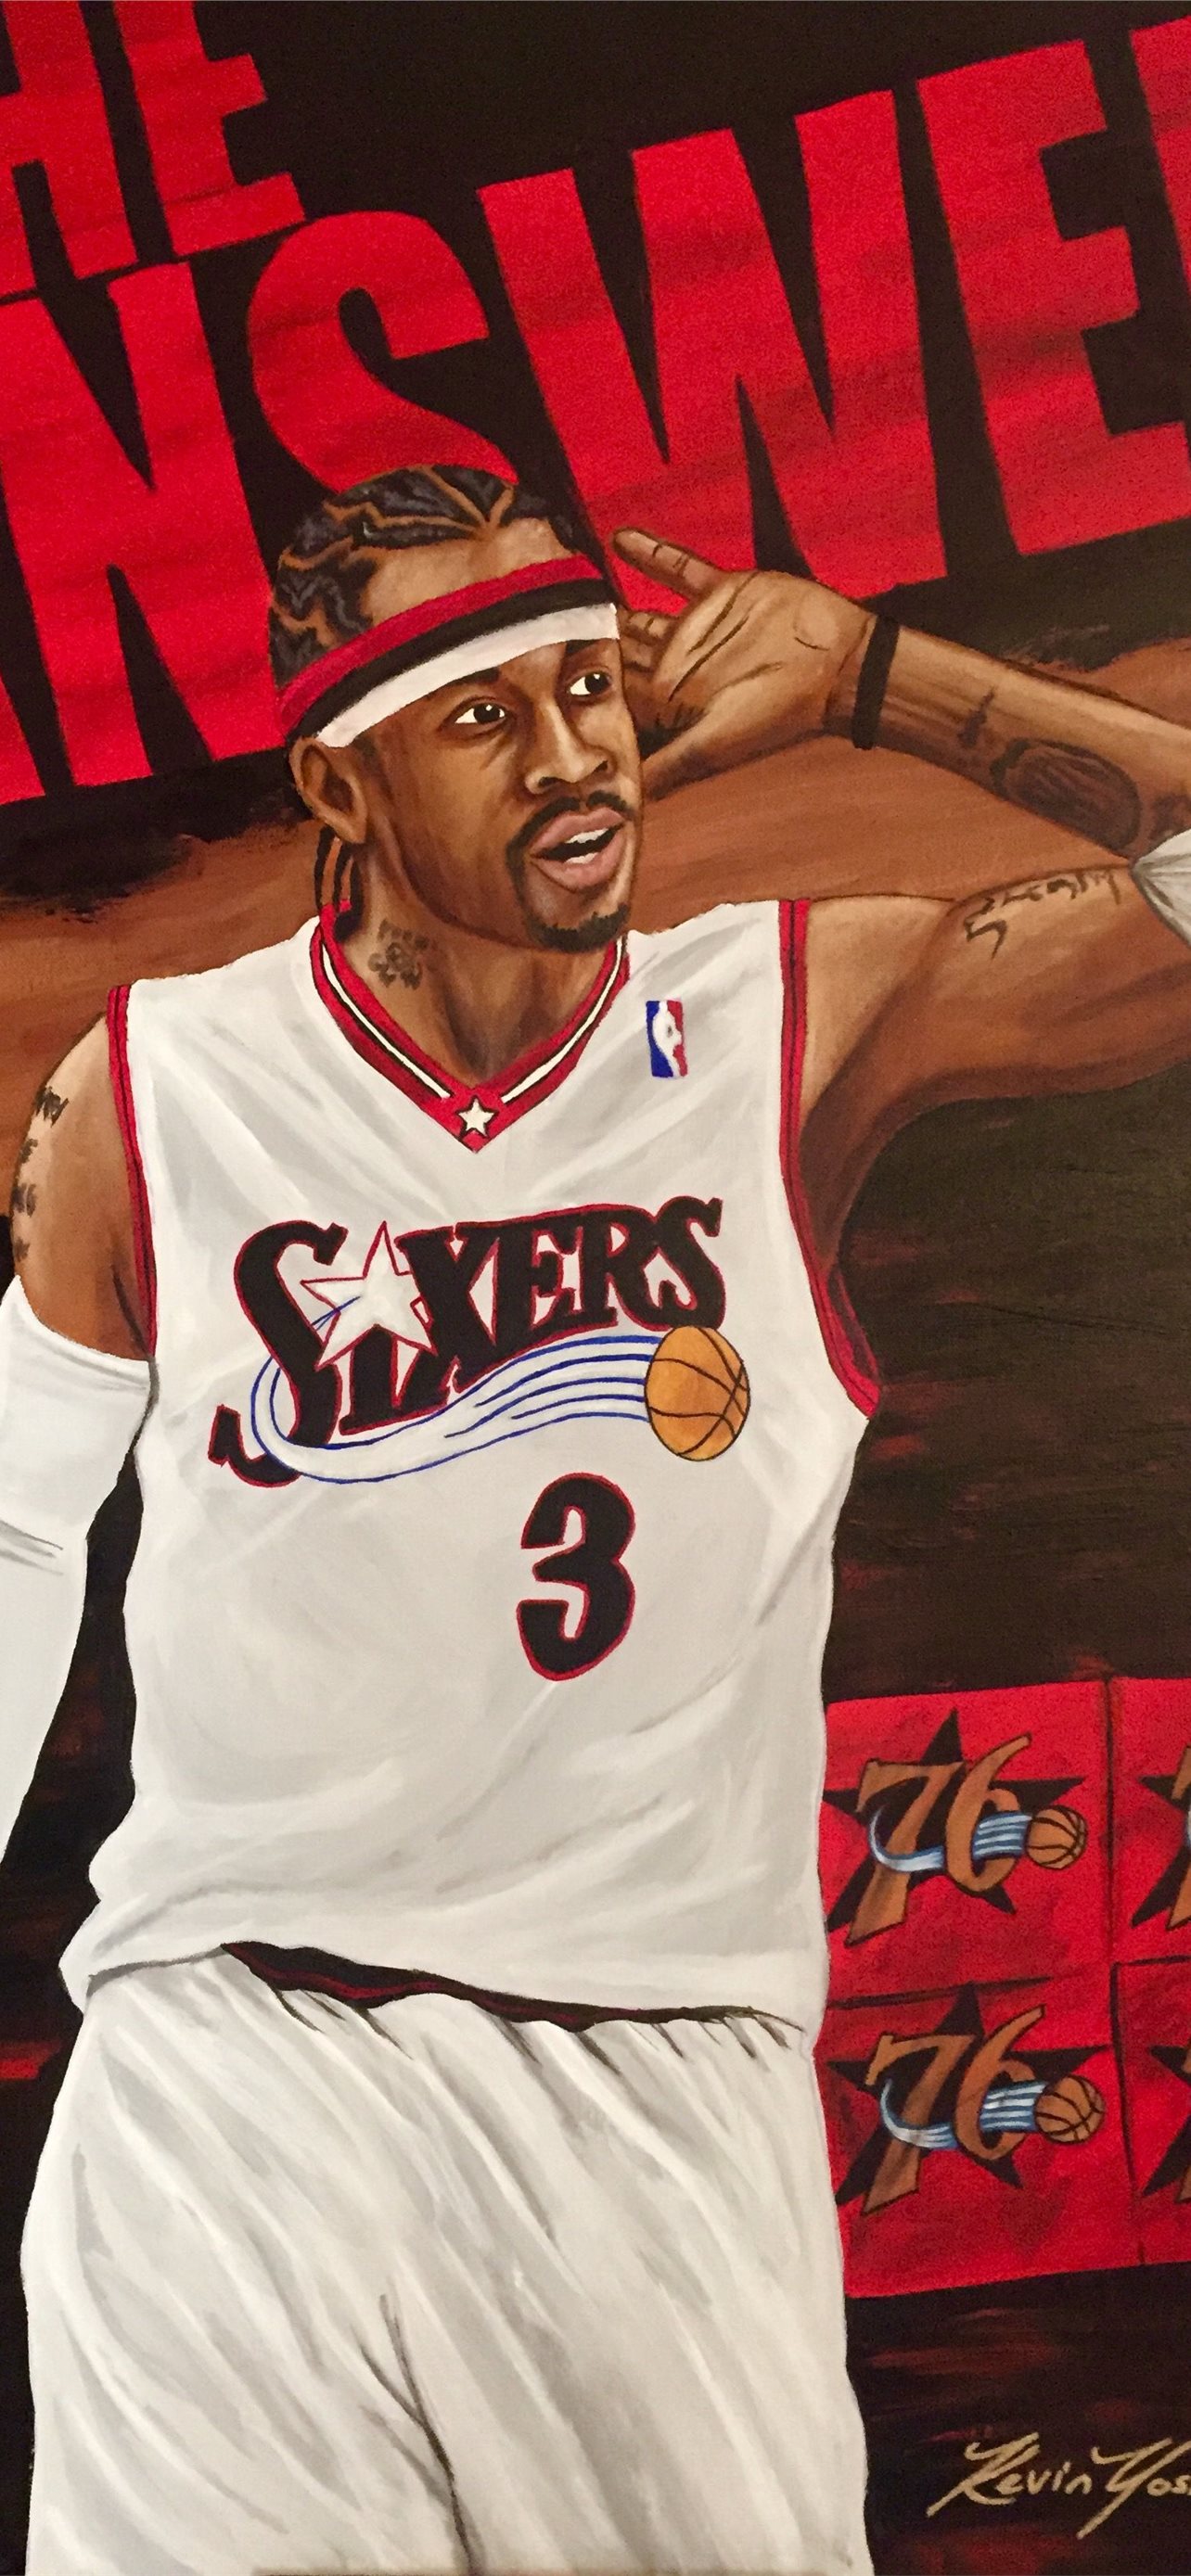 Allen Iverson Top Free Allen Iverson Access Iphone Wallpapers Free Download